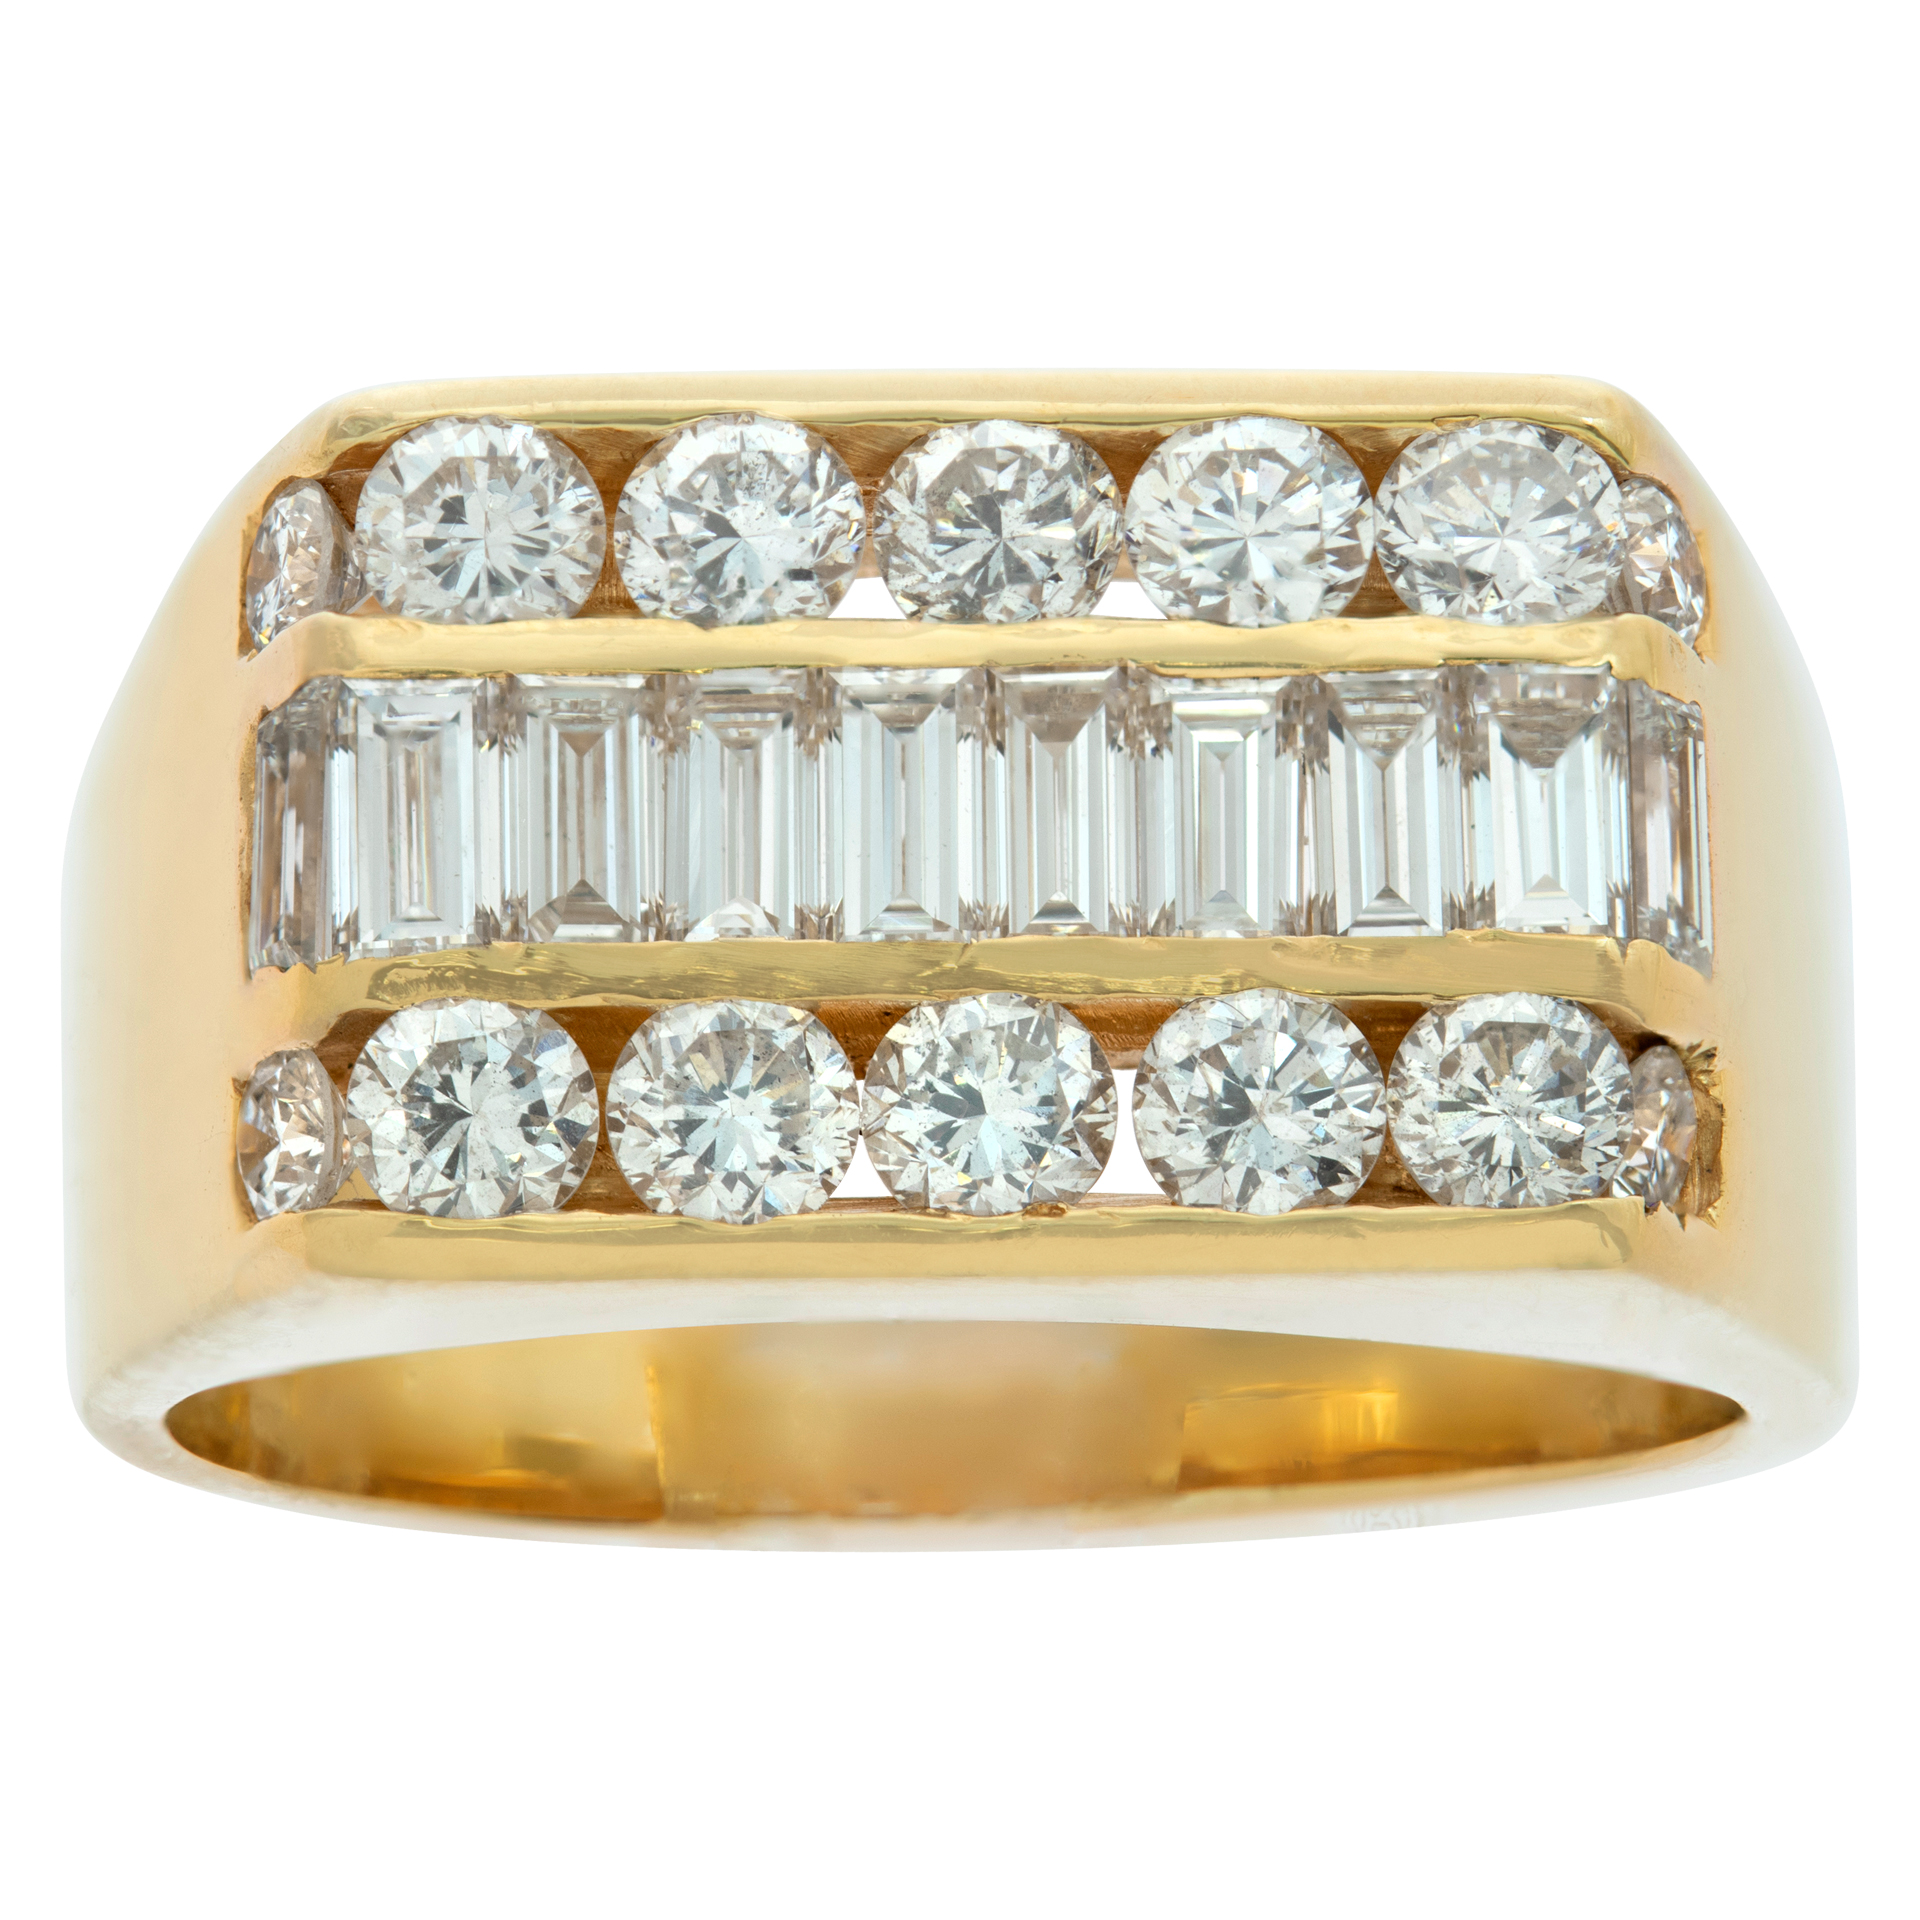 Baguette & round brilliant cut diamonds ring in 14K yellow gold. Baguettes & round brilliant cut diamonds total approx. weight: 3.30 carats